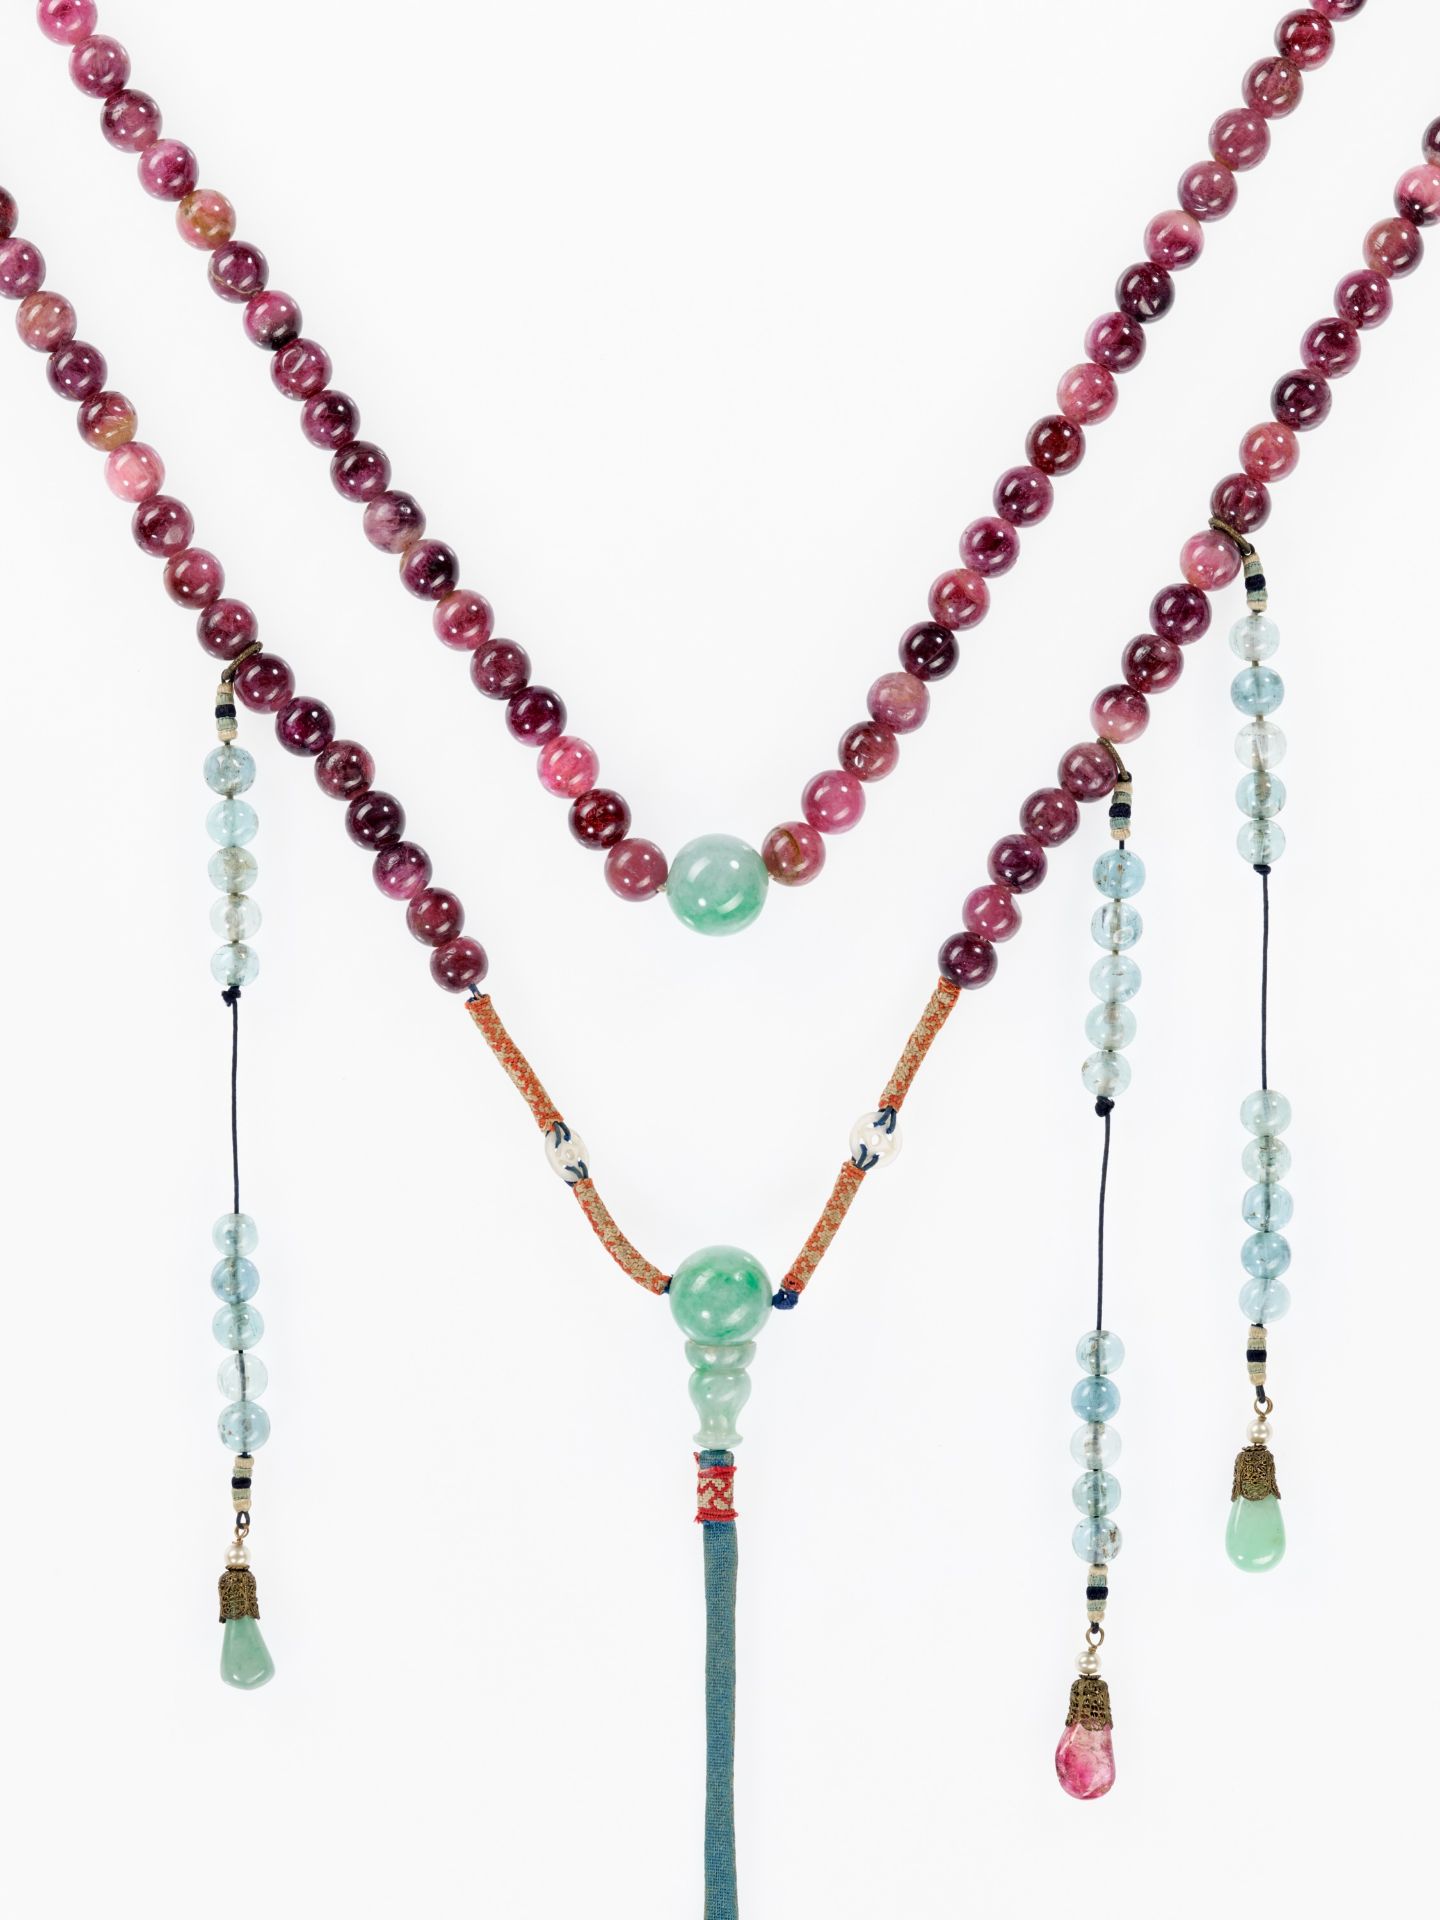 AN IMPRESSIVE TOURMALINE COURT NECKLACE, CHAOZHU, MID-QING - Image 6 of 14